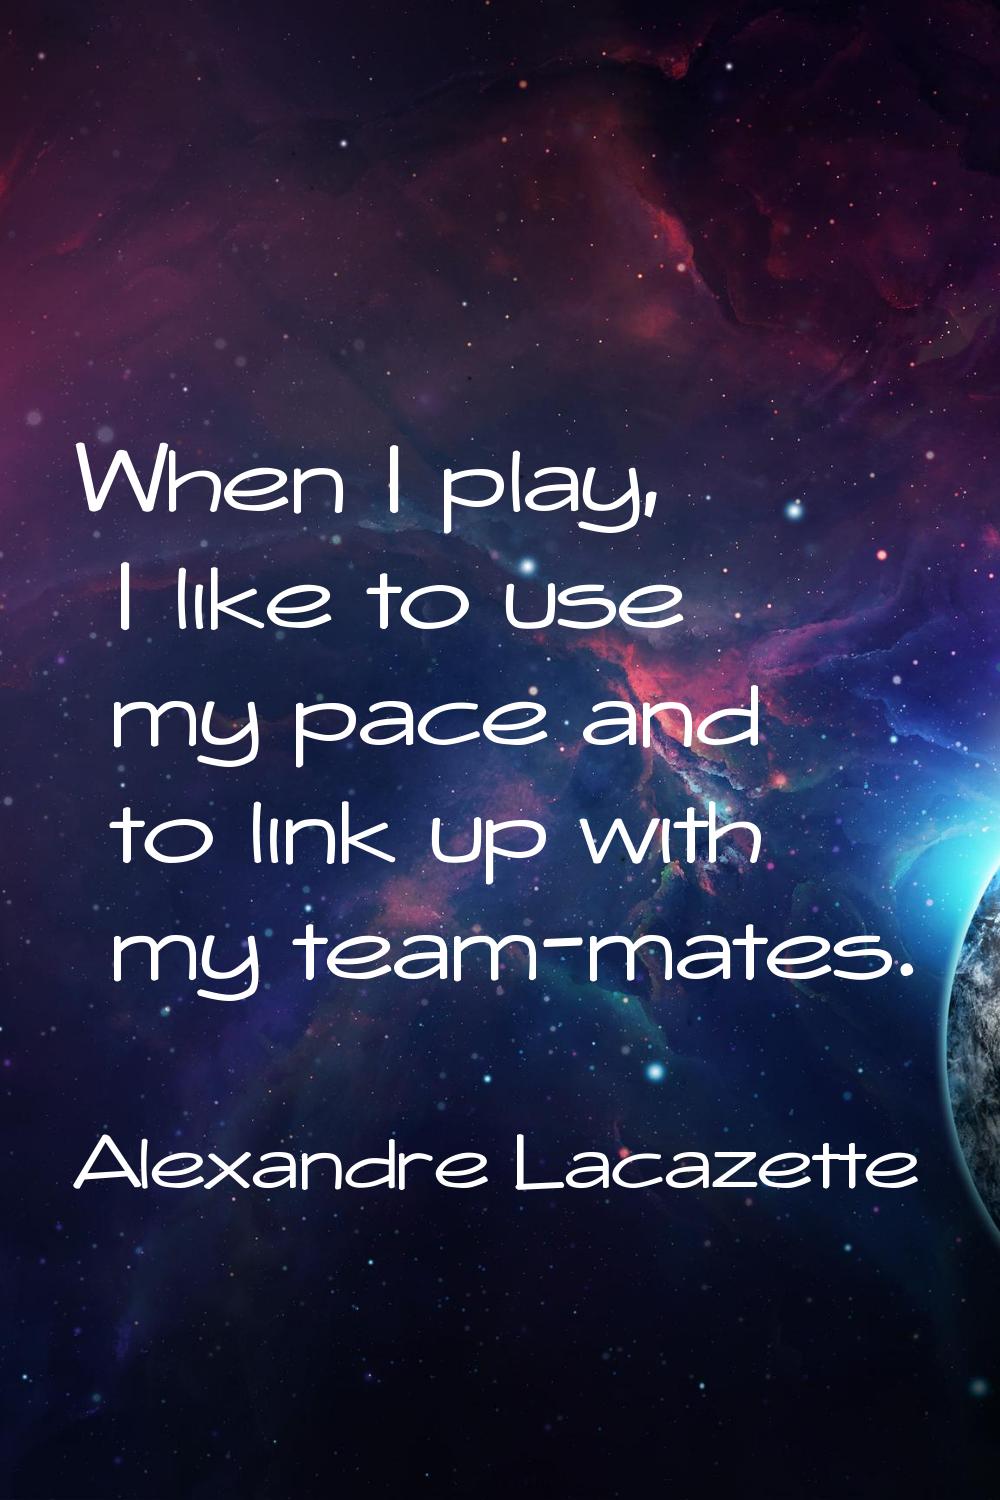 When I play, I like to use my pace and to link up with my team-mates.